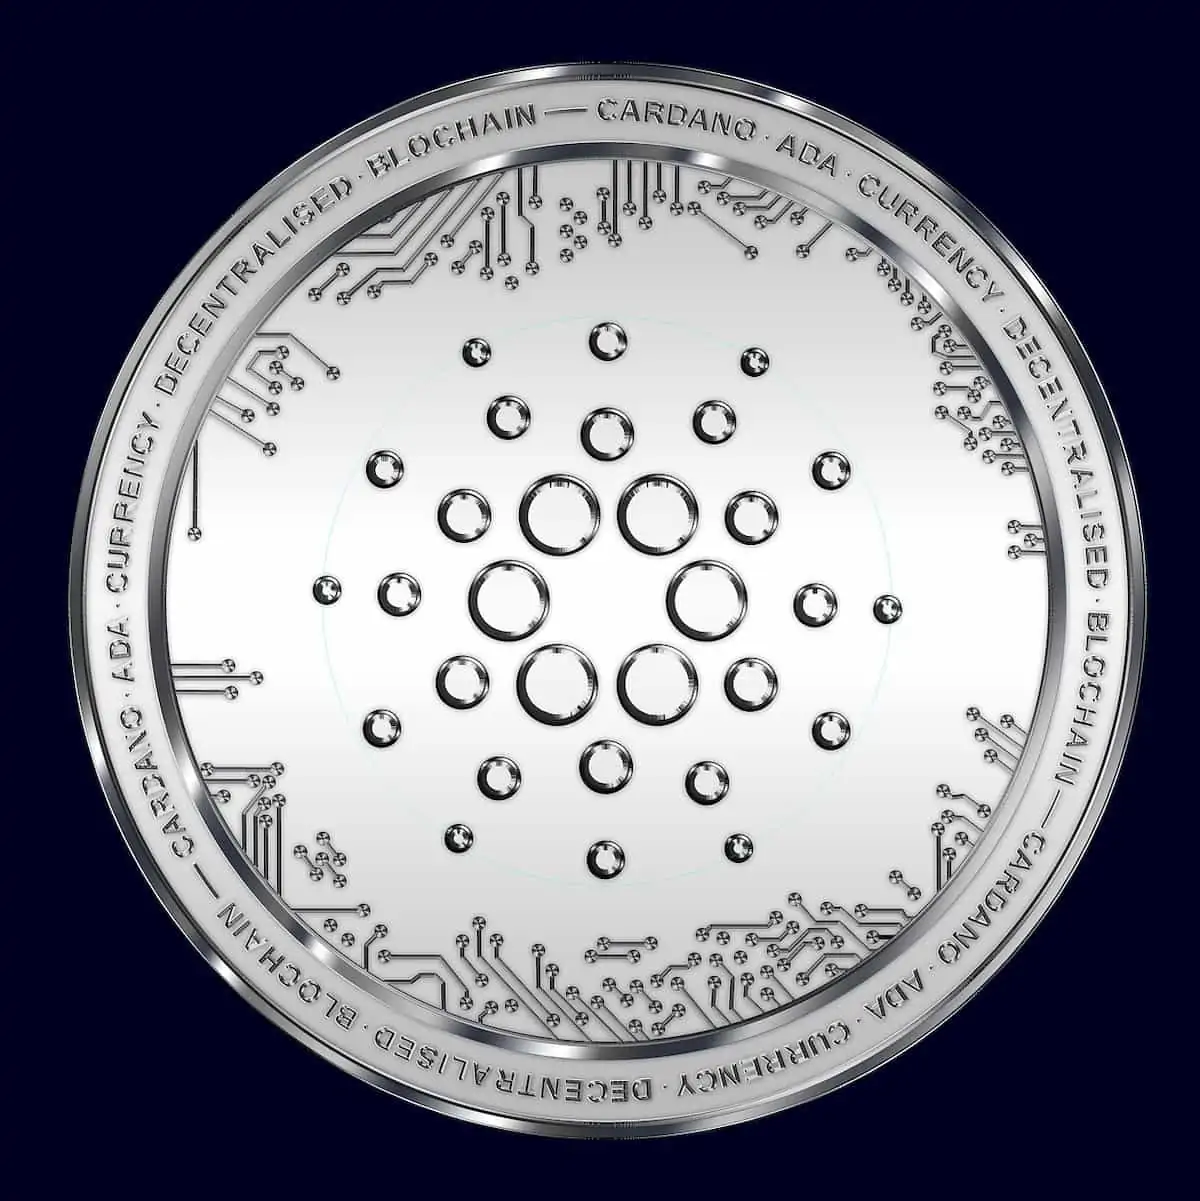 Cardano cryptocurrency